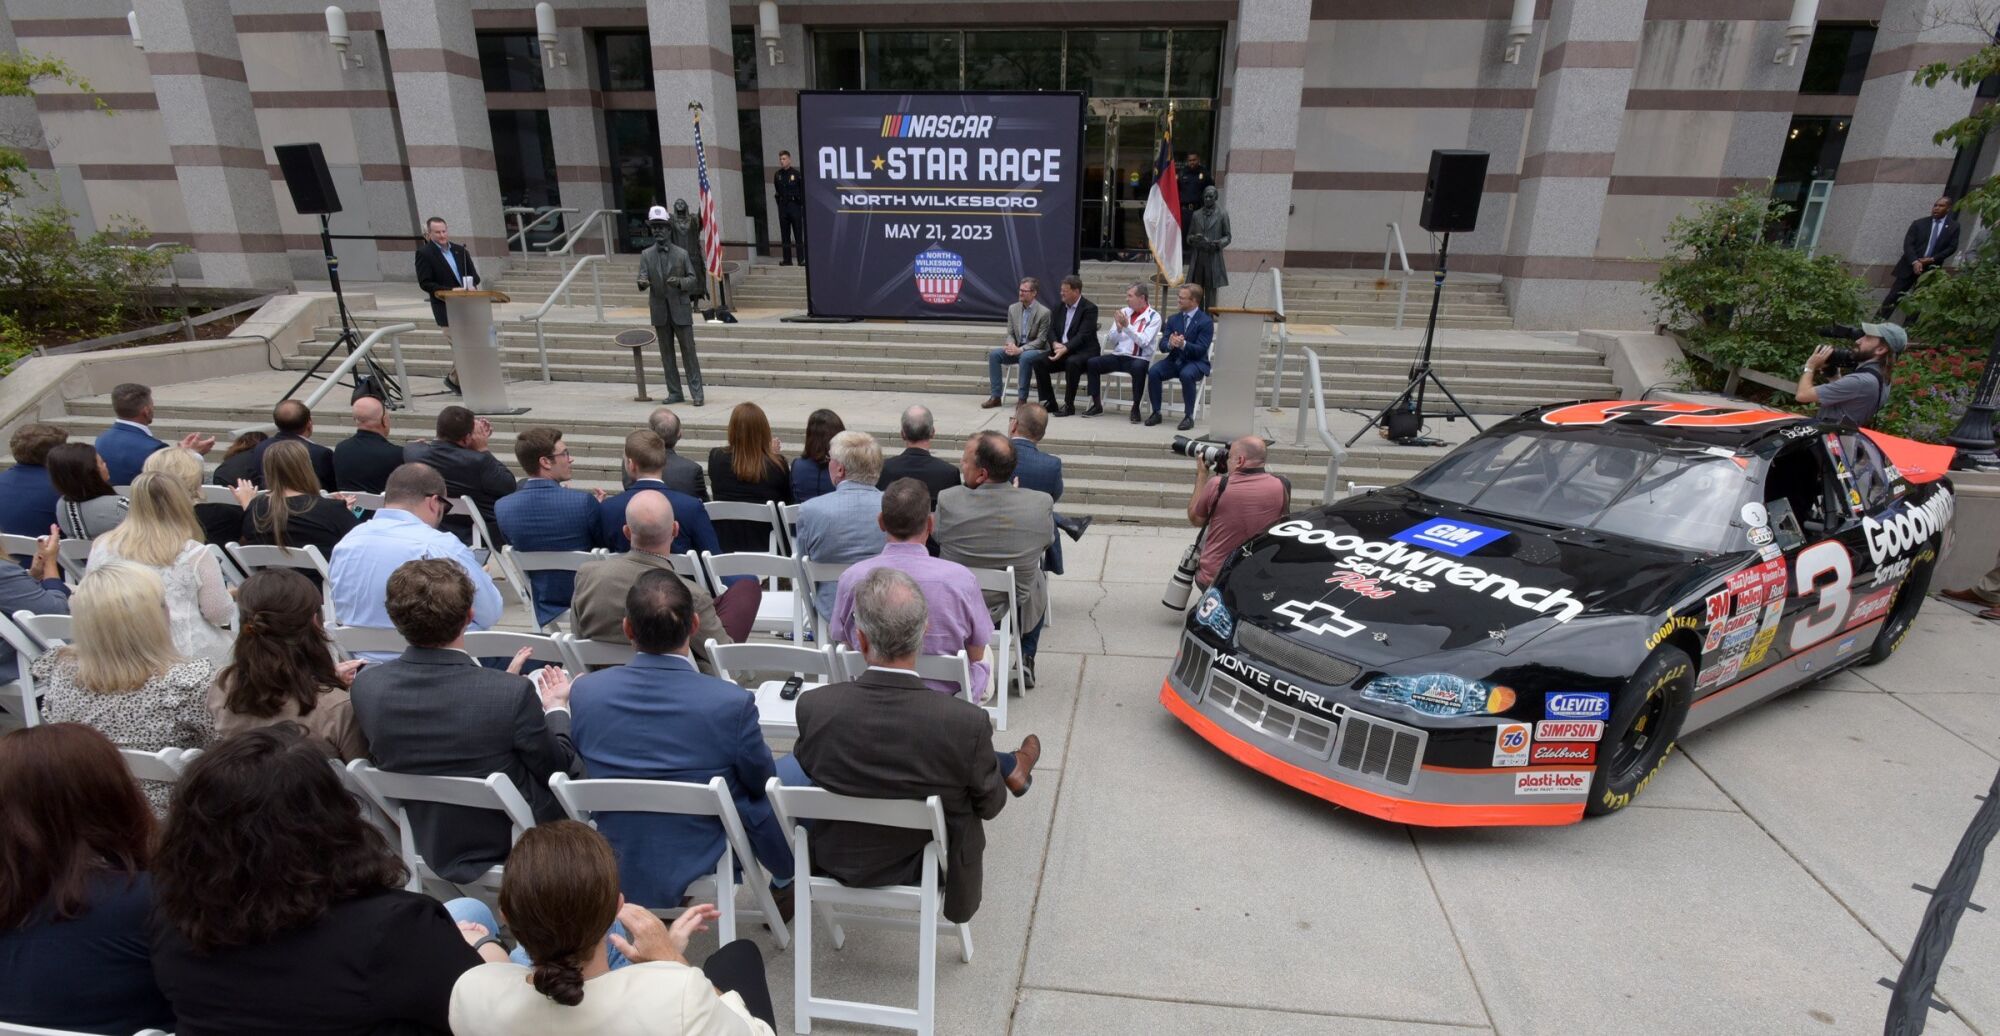 NASCAR embraces its roots with North Wilkesboro homecoming